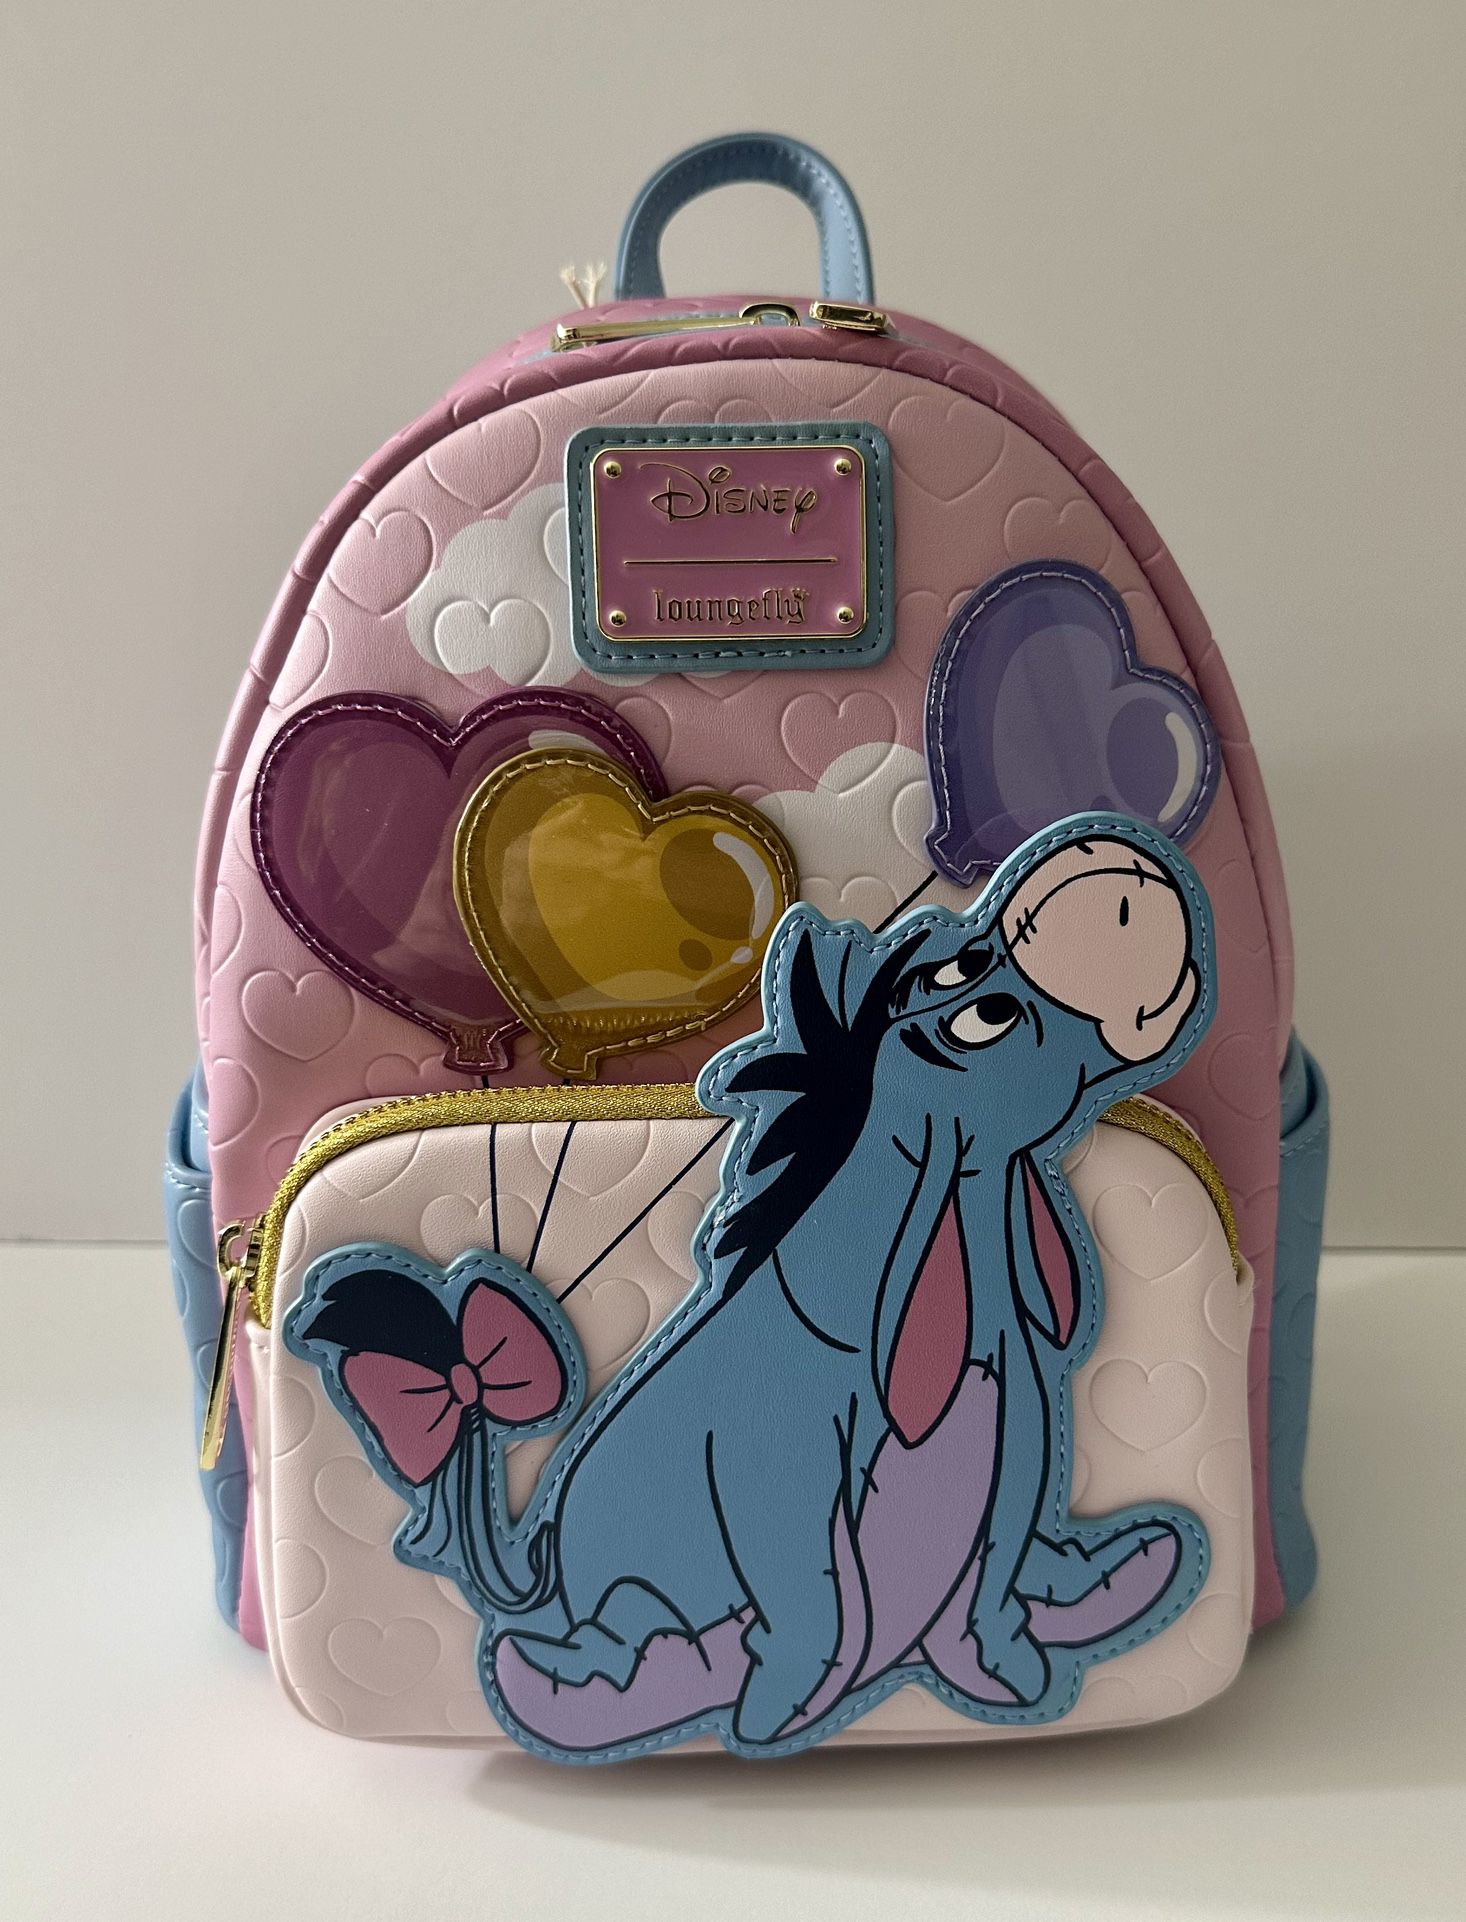 BRAND NEW WITH TAGS DISNEY WINNIE THE POOH EEYORE BALLOONS LOUNGEFLY MINI BACKPACK. BOXLUNCH EXCLUSIVE. 